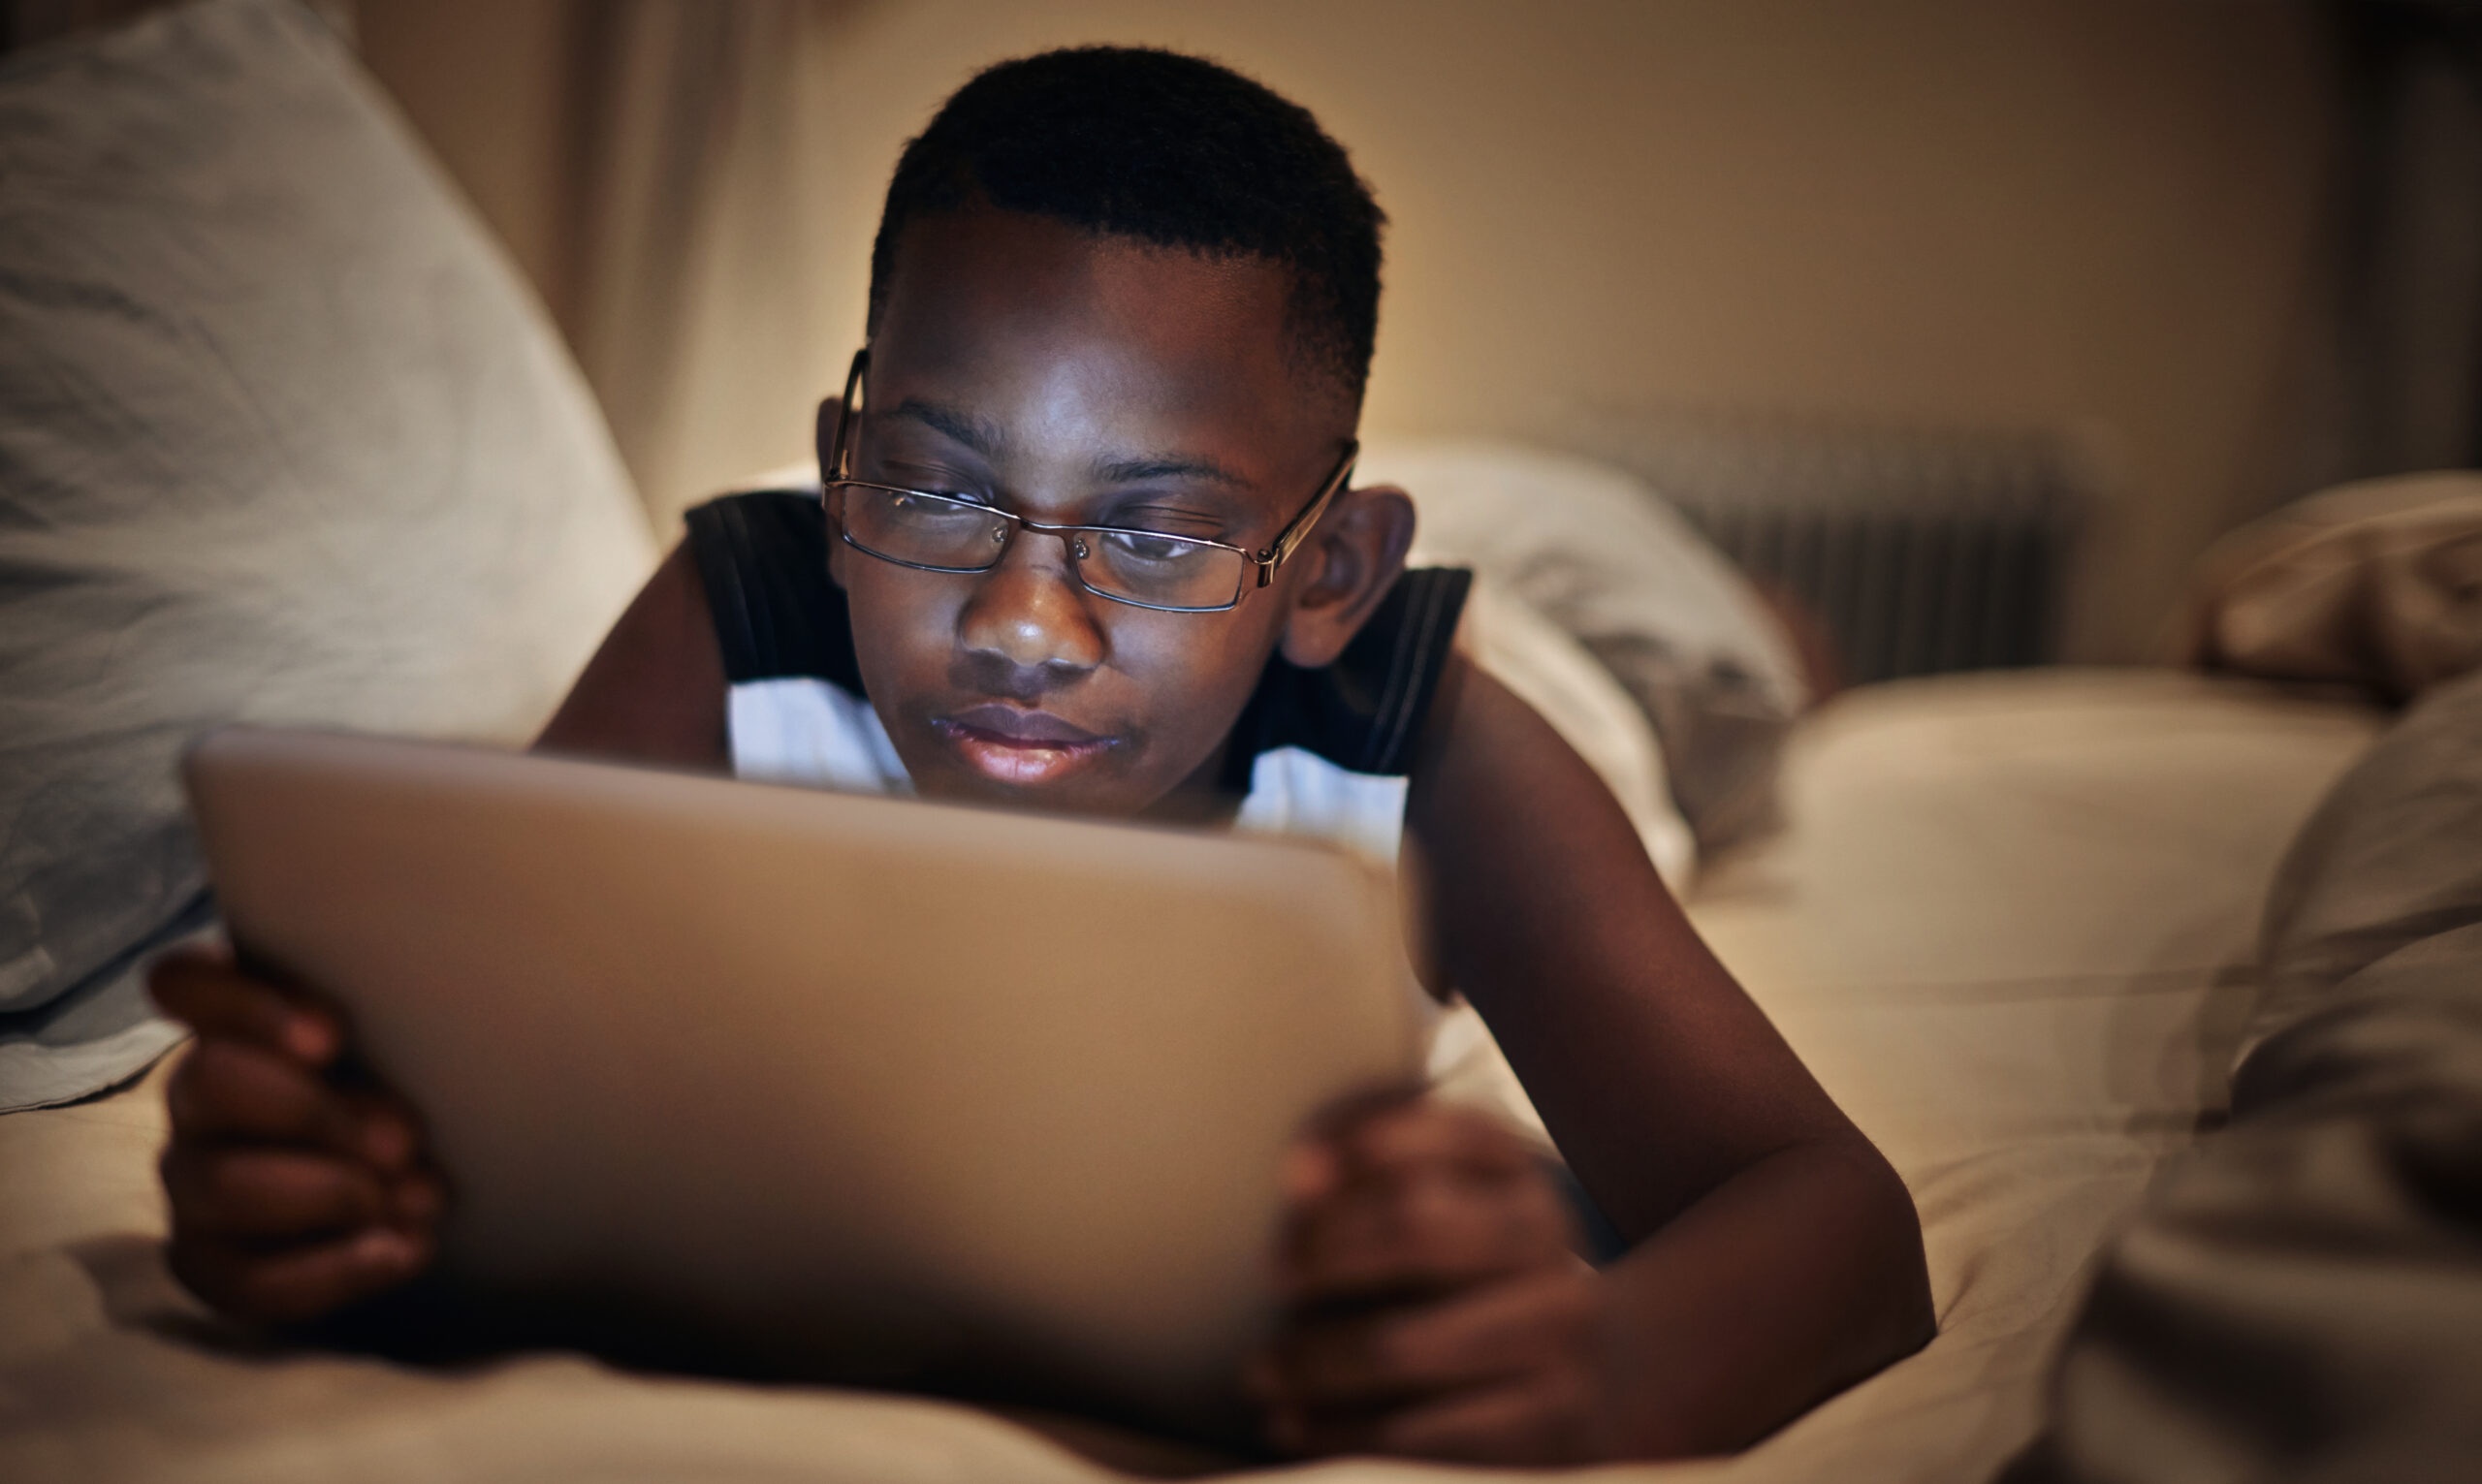 a boy lies on the couch while reading from a tablet screen